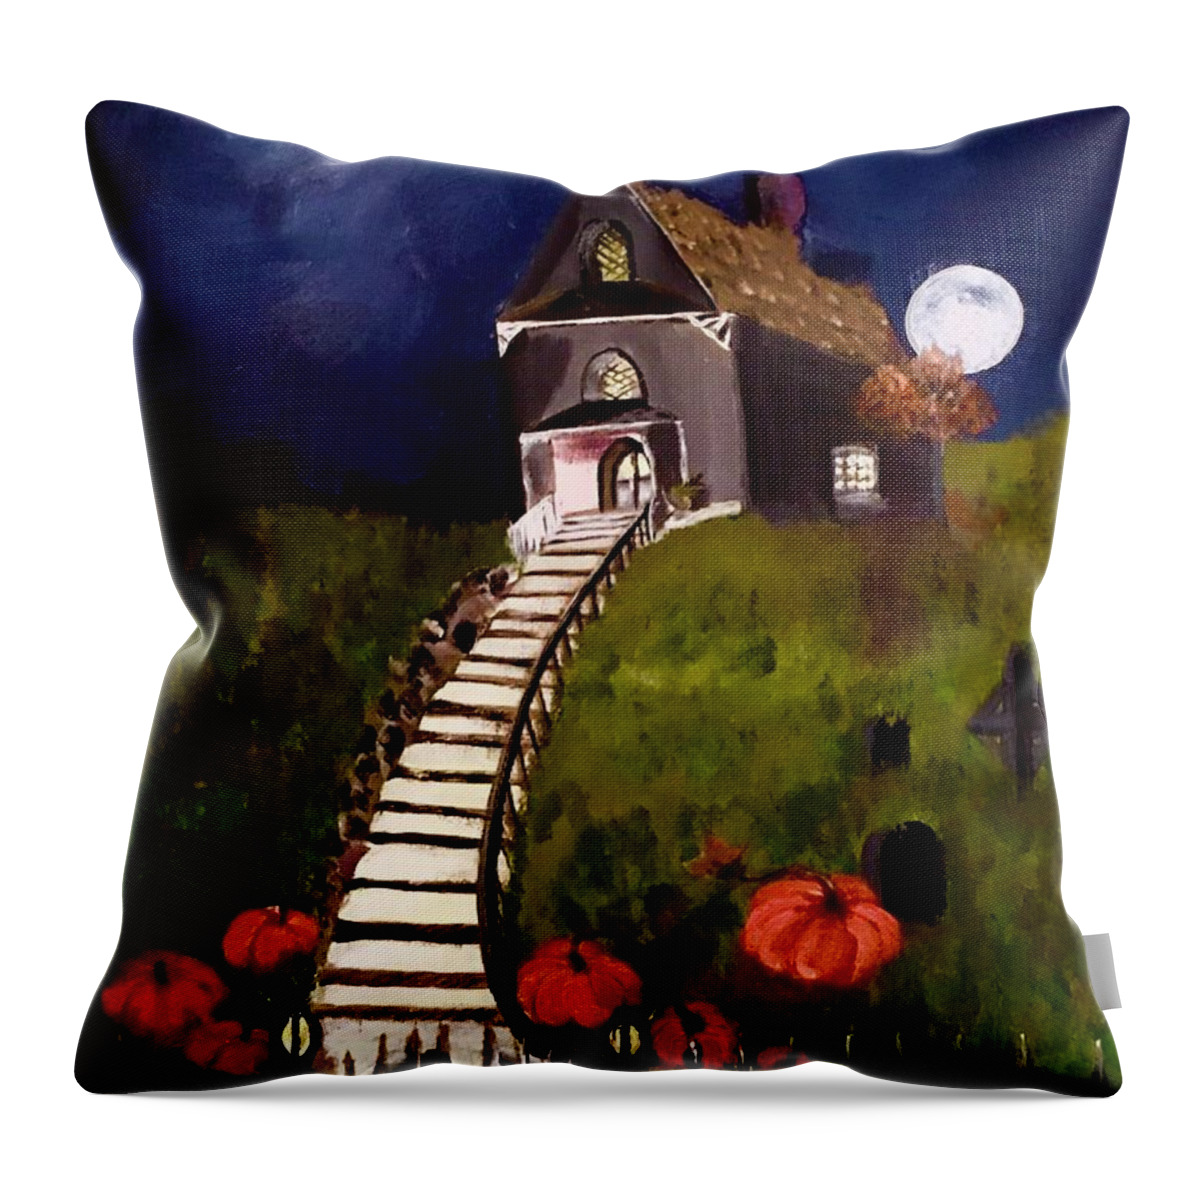 Full Throw Pillow featuring the painting Full Moon Autumn And Home by Lisa Kaiser